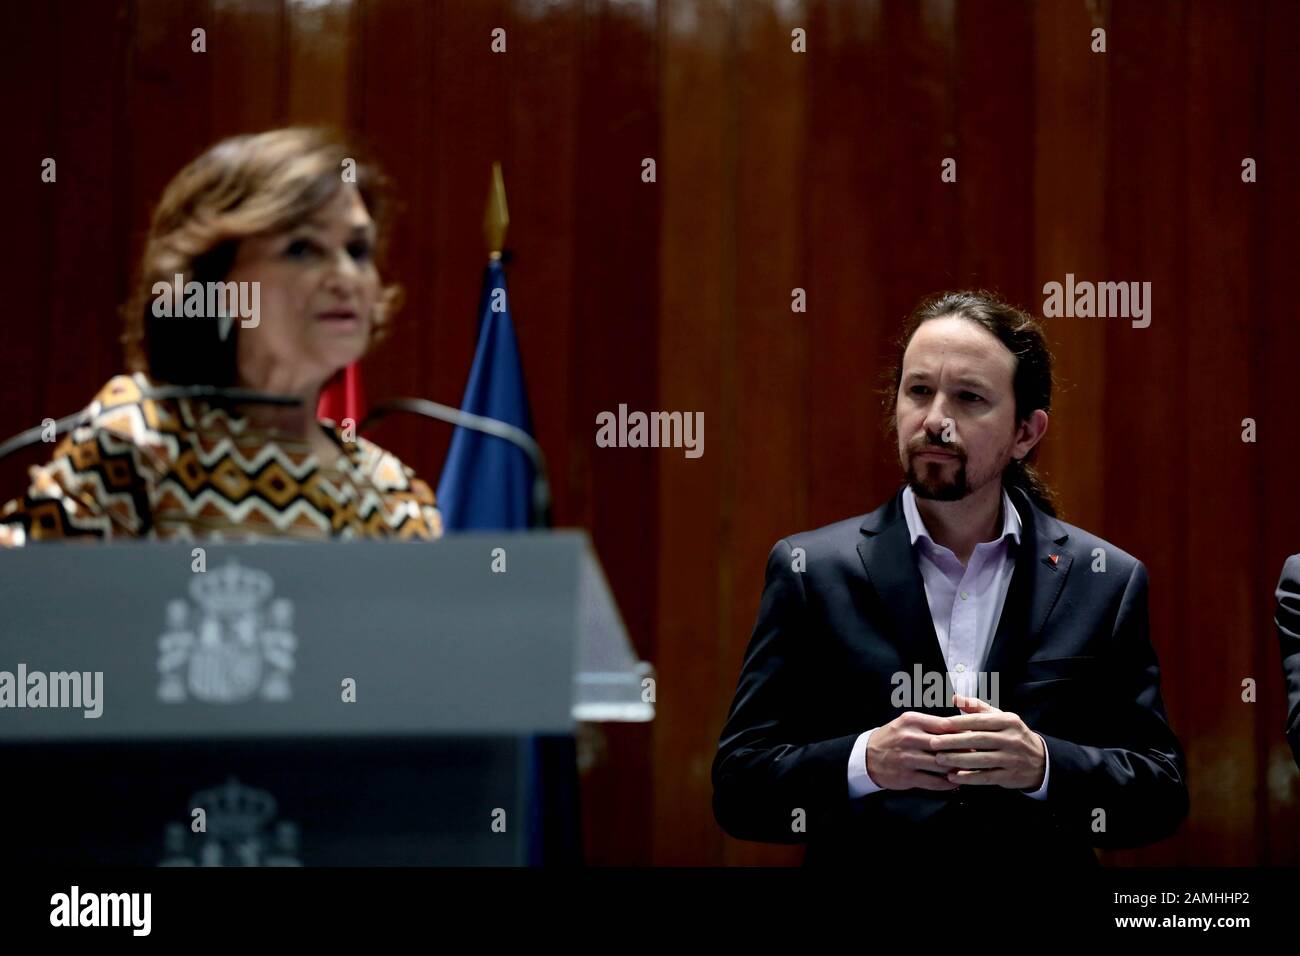 Madrid Spain; 13/01/2020.- Pablo Iglesias (R) second vice president of the spanish governmentand Minister of Social Rights and 2030 Agenda, and Carmen Calvo Minister of the Presidency, Relations with the Courts and Democratic Memory in his inauguration as minister and exchange of Ministerial Portfolios in the headquarters of the ministry of health. Iglesias belongs to the United We Party (Unidas Podemos) and Garzón a United Rigth (Izquierda Unida) that coalition with the President of Spain Pedro Sánchez of the Socialist Workers Party (Psoe)Photo: Juan Carlos Rojas/Picture Alliance | usage wo Stock Photo